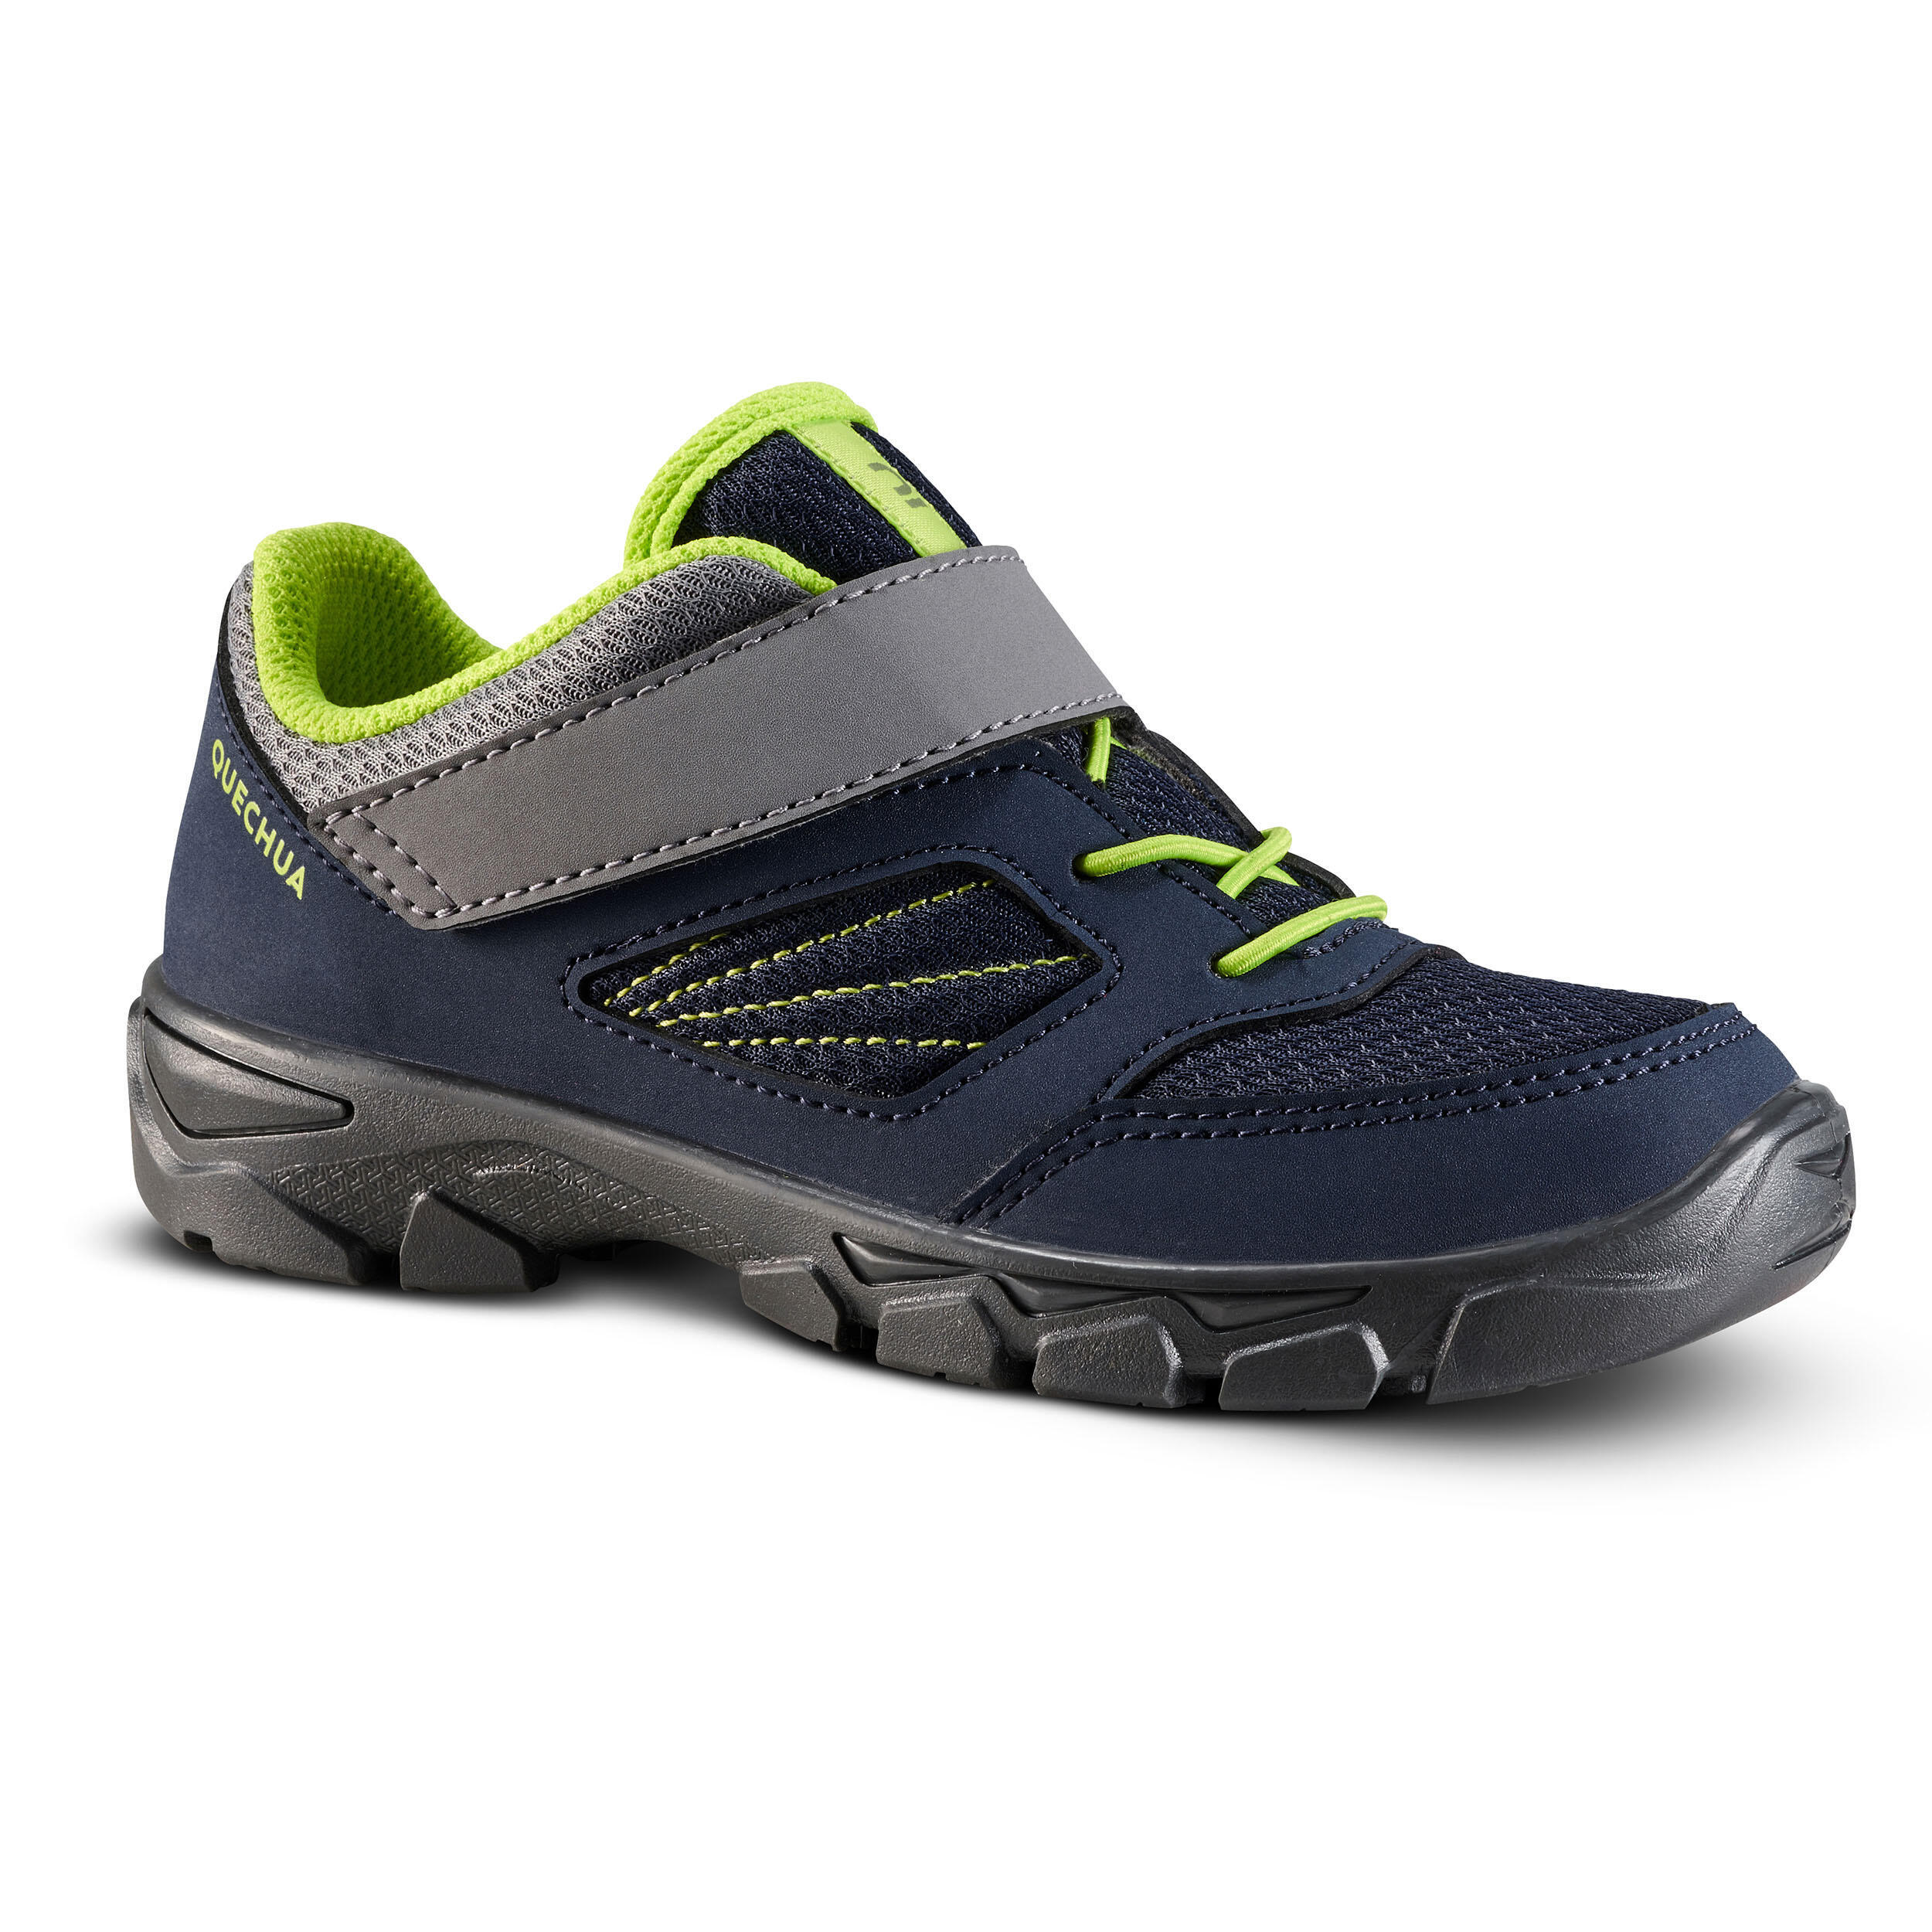 Children's Hiking Low Lace-up Shoes MH100 - 6.5C to 1.5 - Blue 1/6